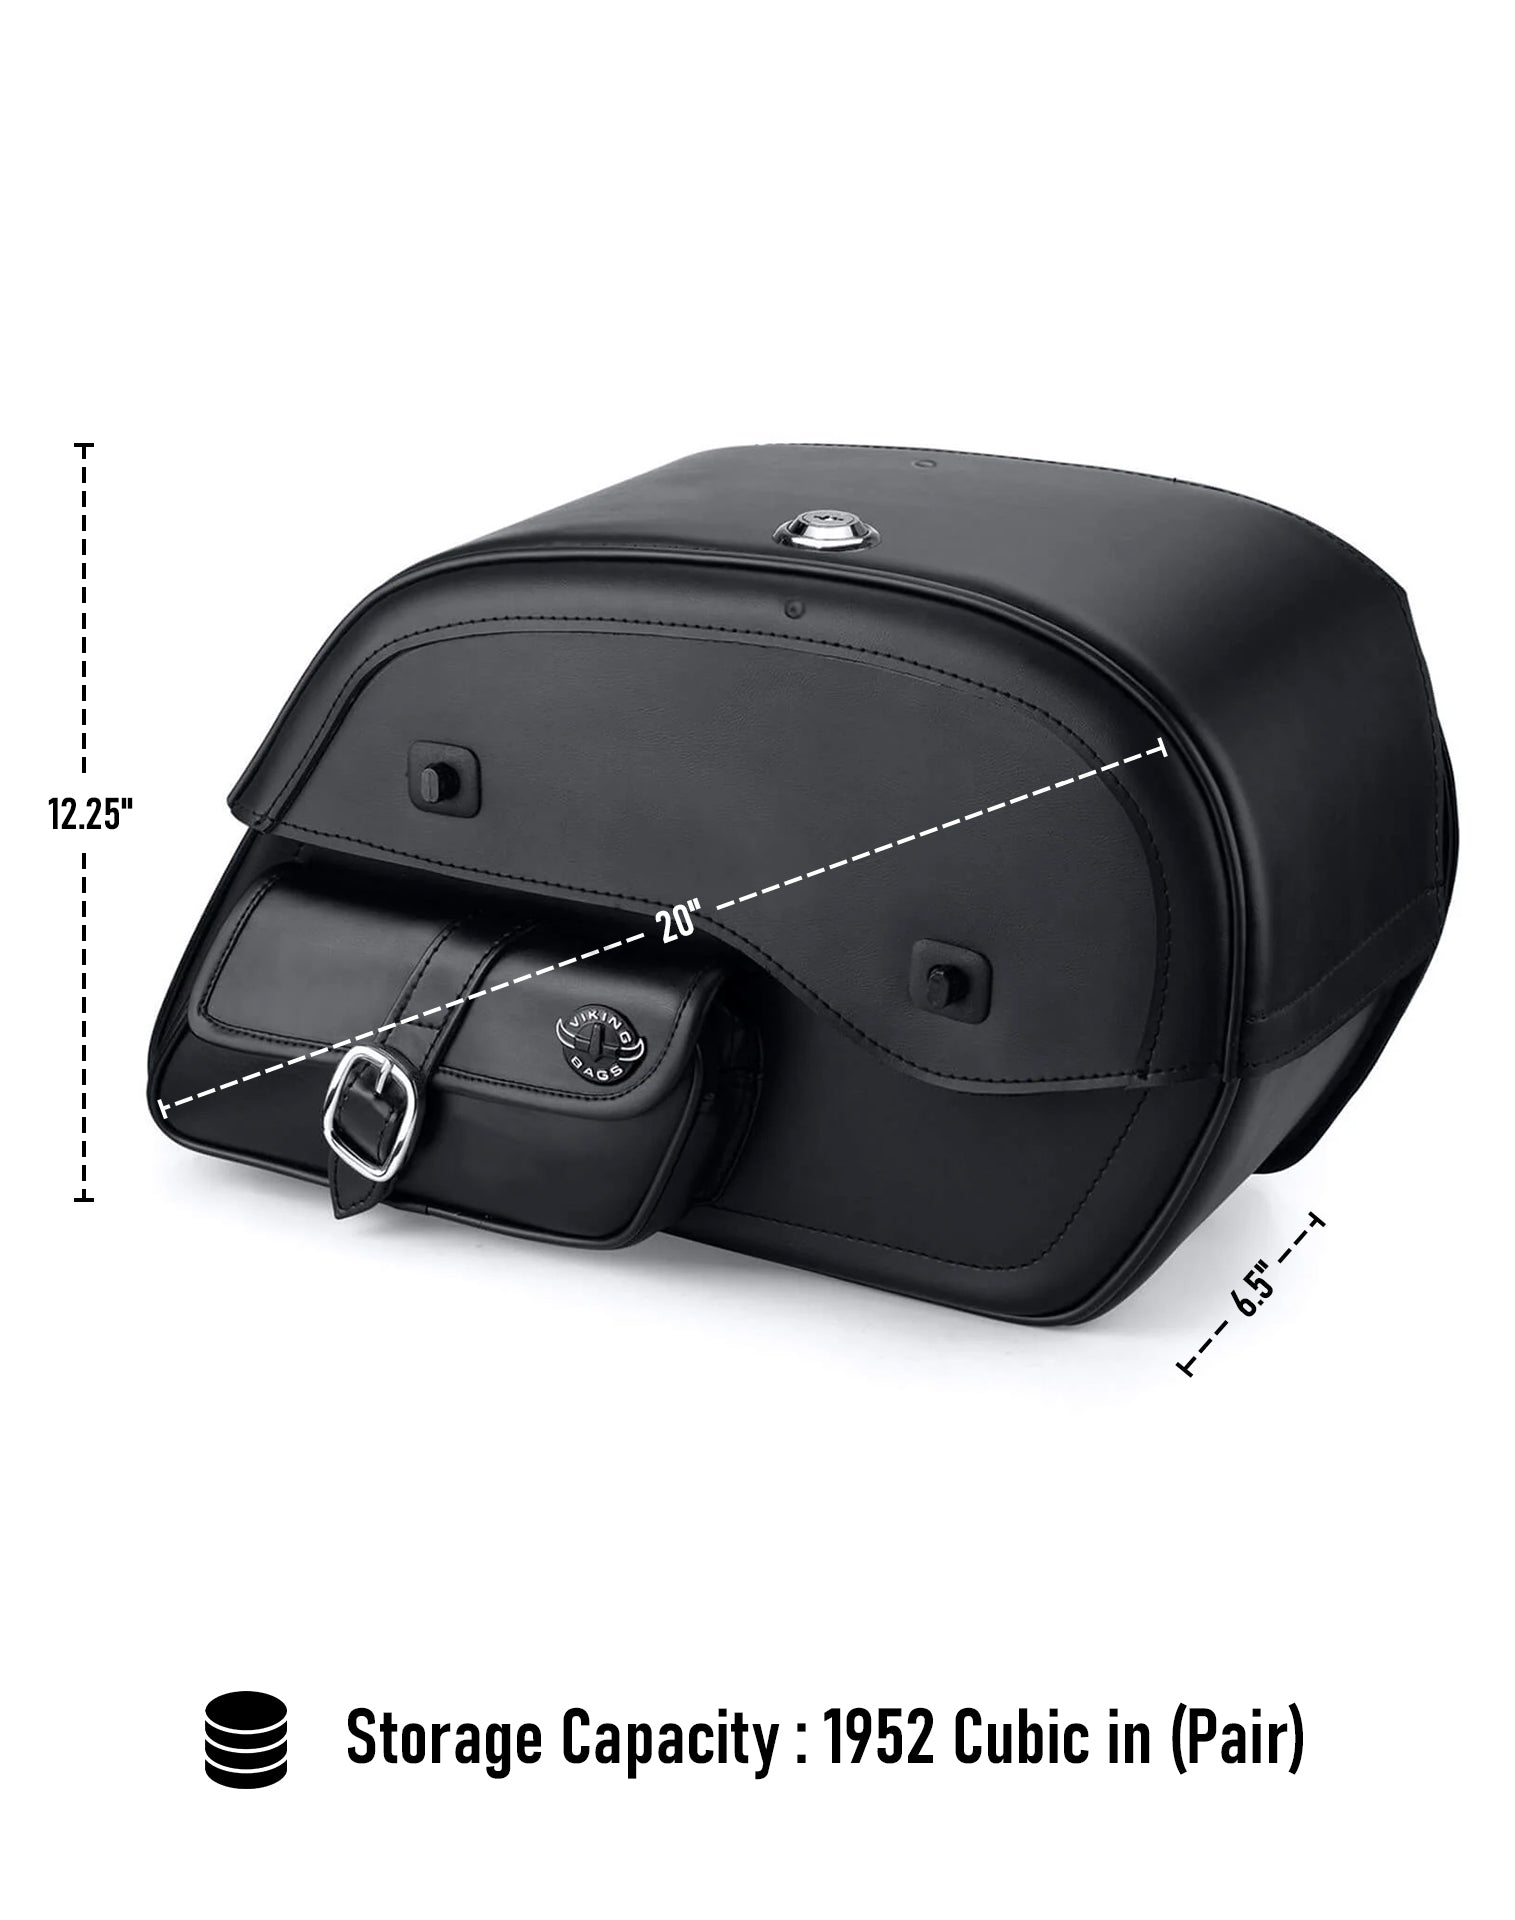 Viking Essential Side Pocket Large Yamaha Stratoliner Xv 1900 Leather Motorcycle Saddlebags Can Store Your Ridings Gears